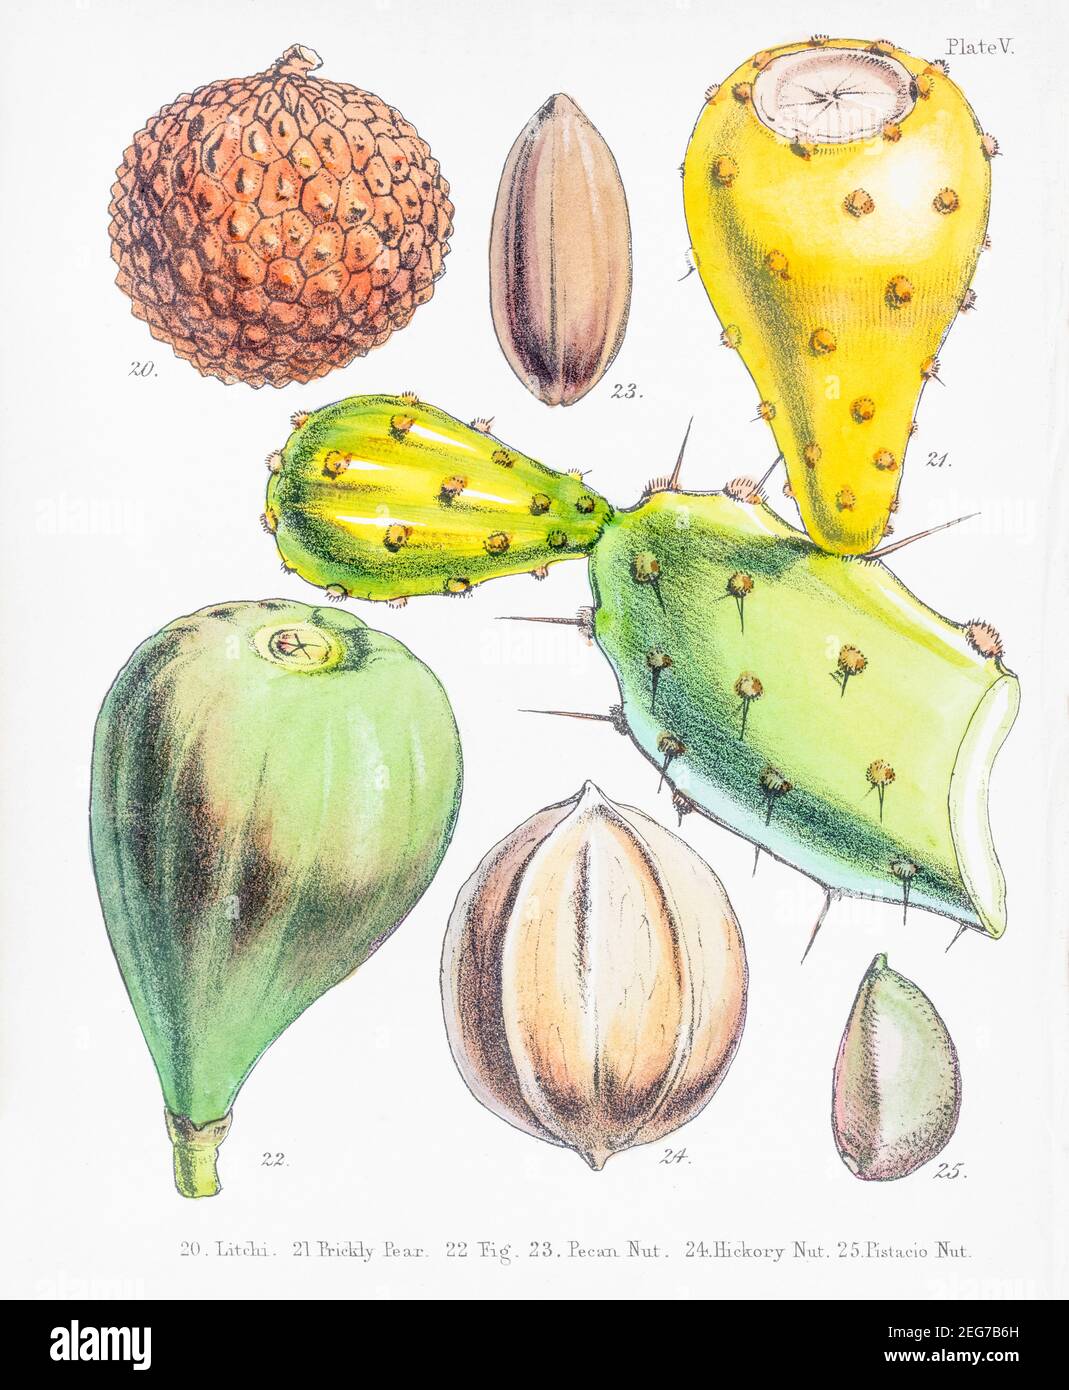 19th c. hand-painted Victorian botanical illustration of Lychee & Prickly Pear plants + Pecan, Hickory / Carya, Pistachio nuts. Economic botany. Stock Photo